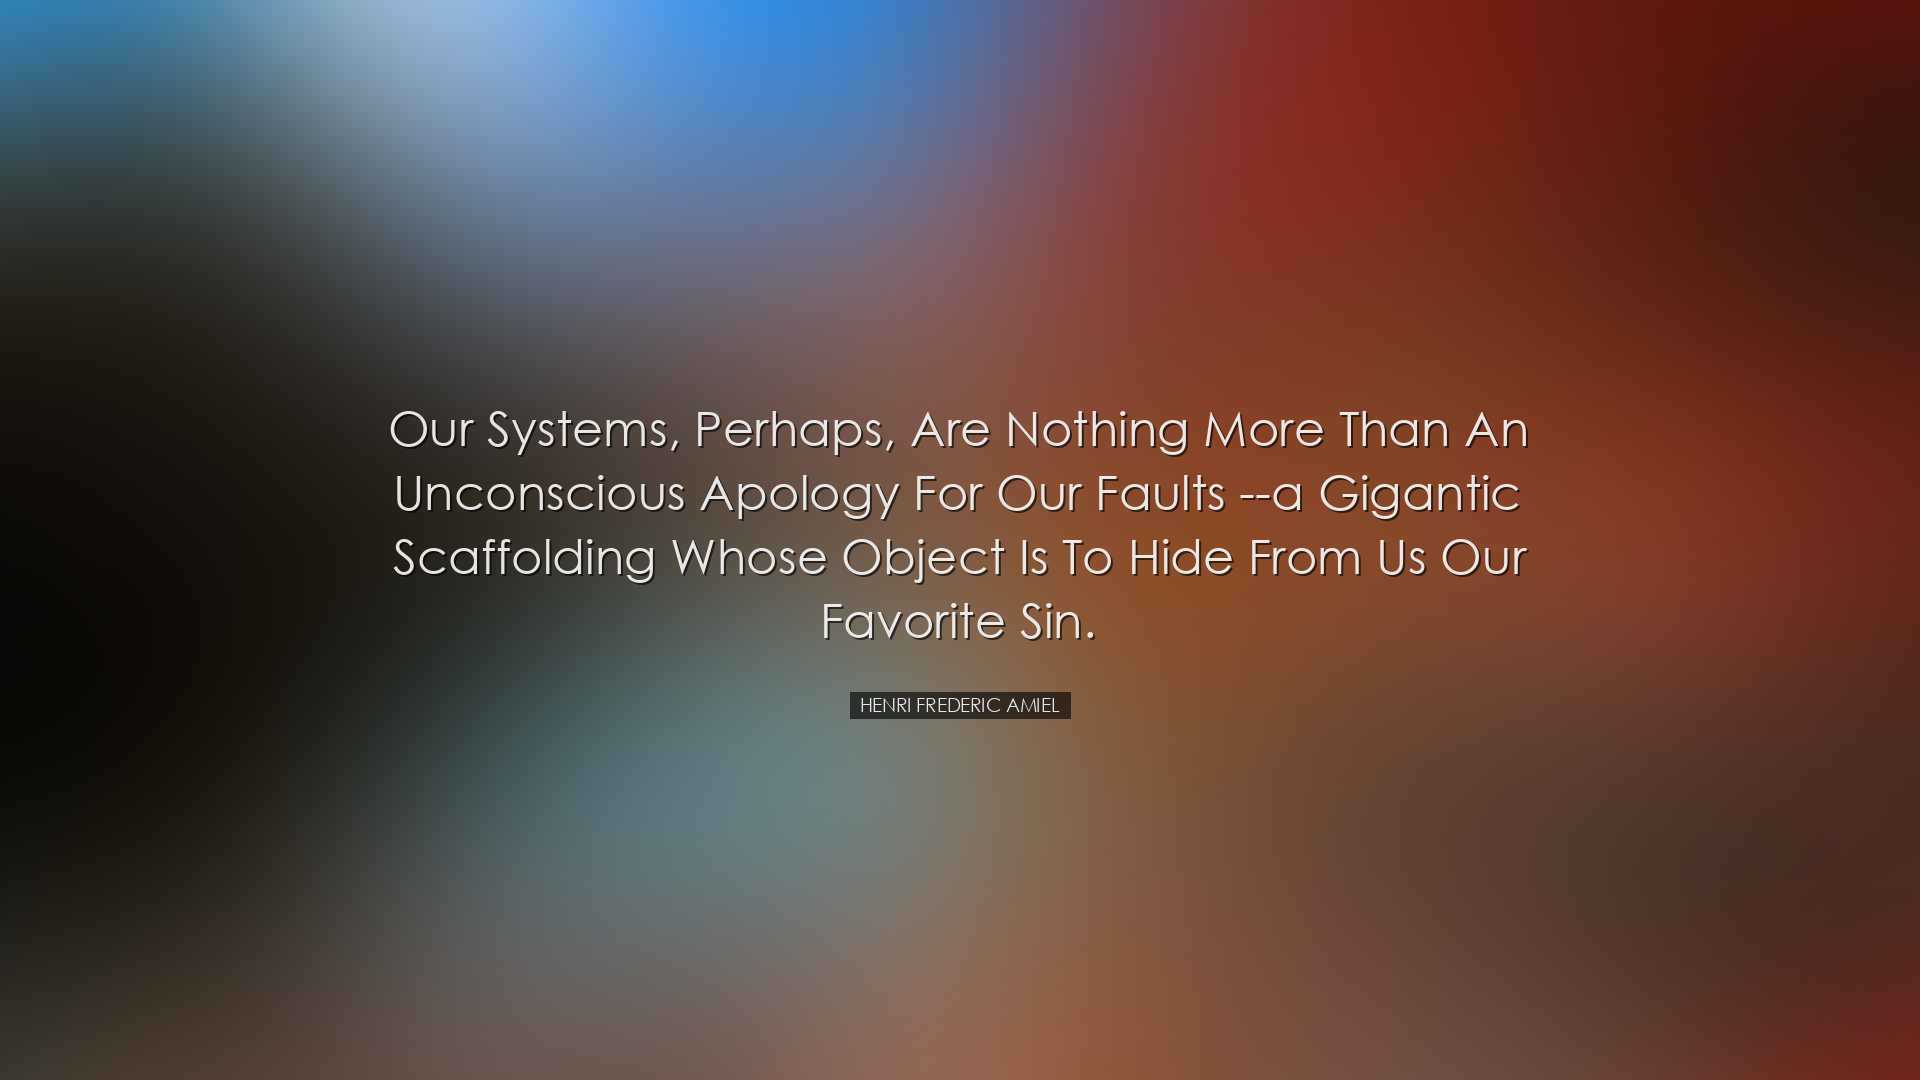 Our systems, perhaps, are nothing more than an unconscious apology